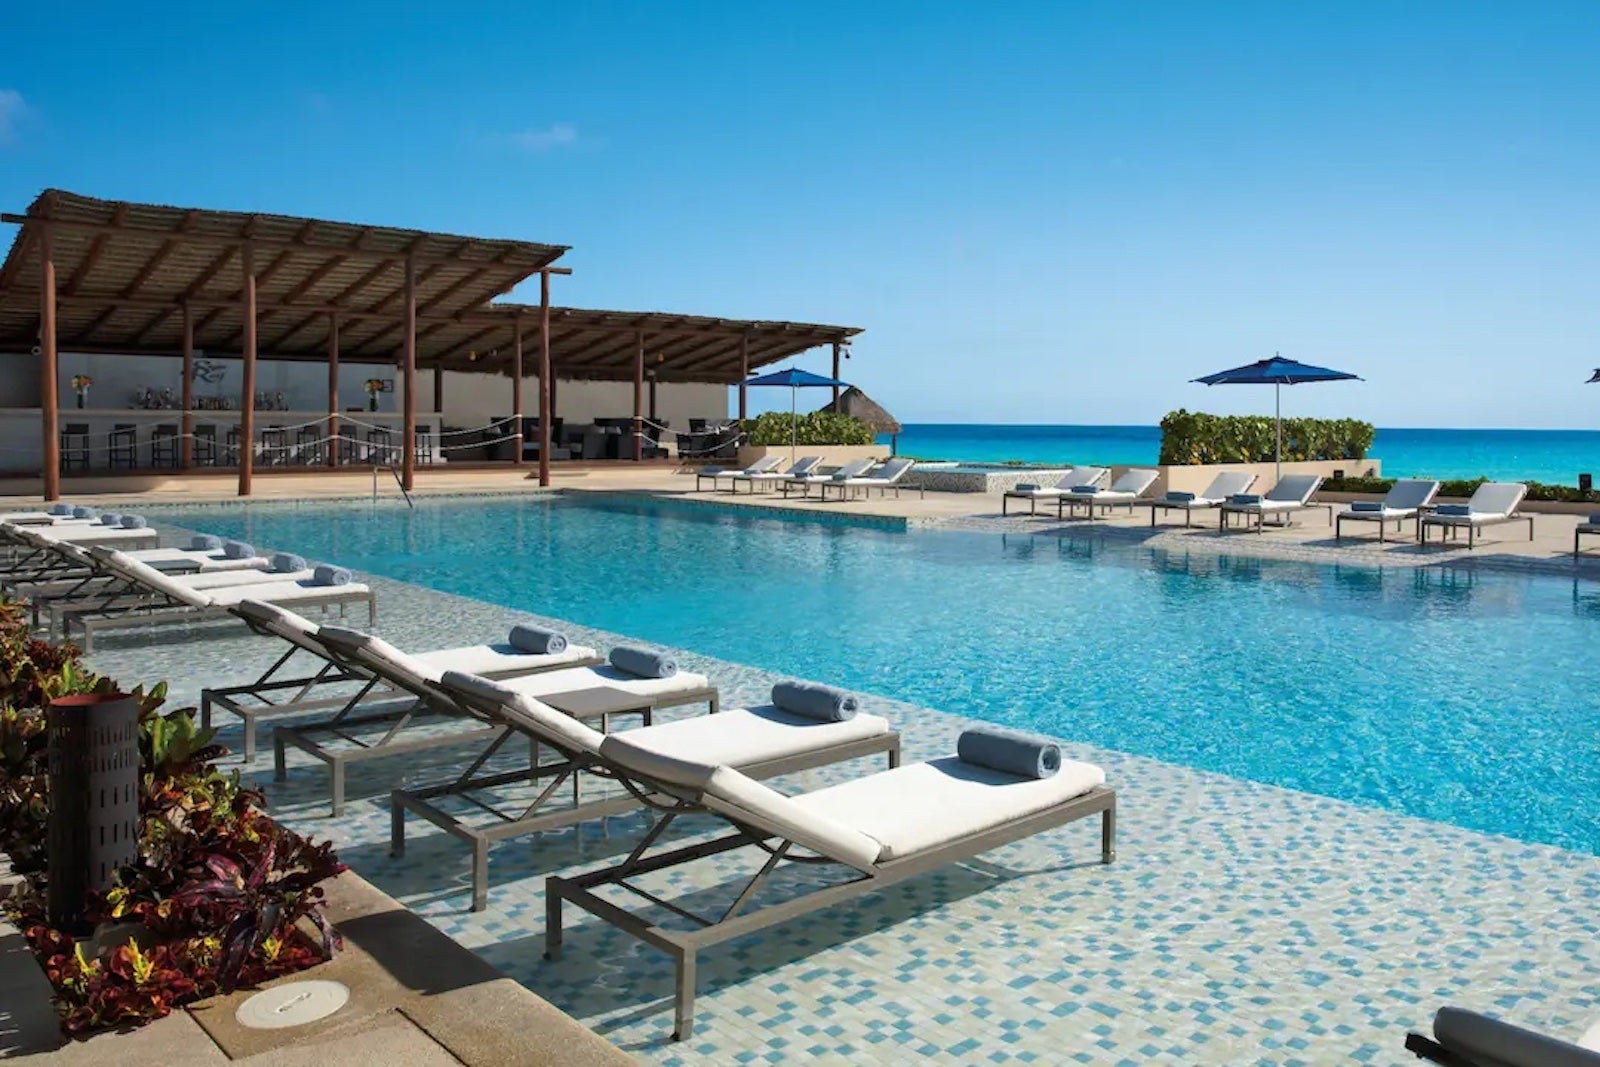 A hotel pool surrounded by empty lounge chairs